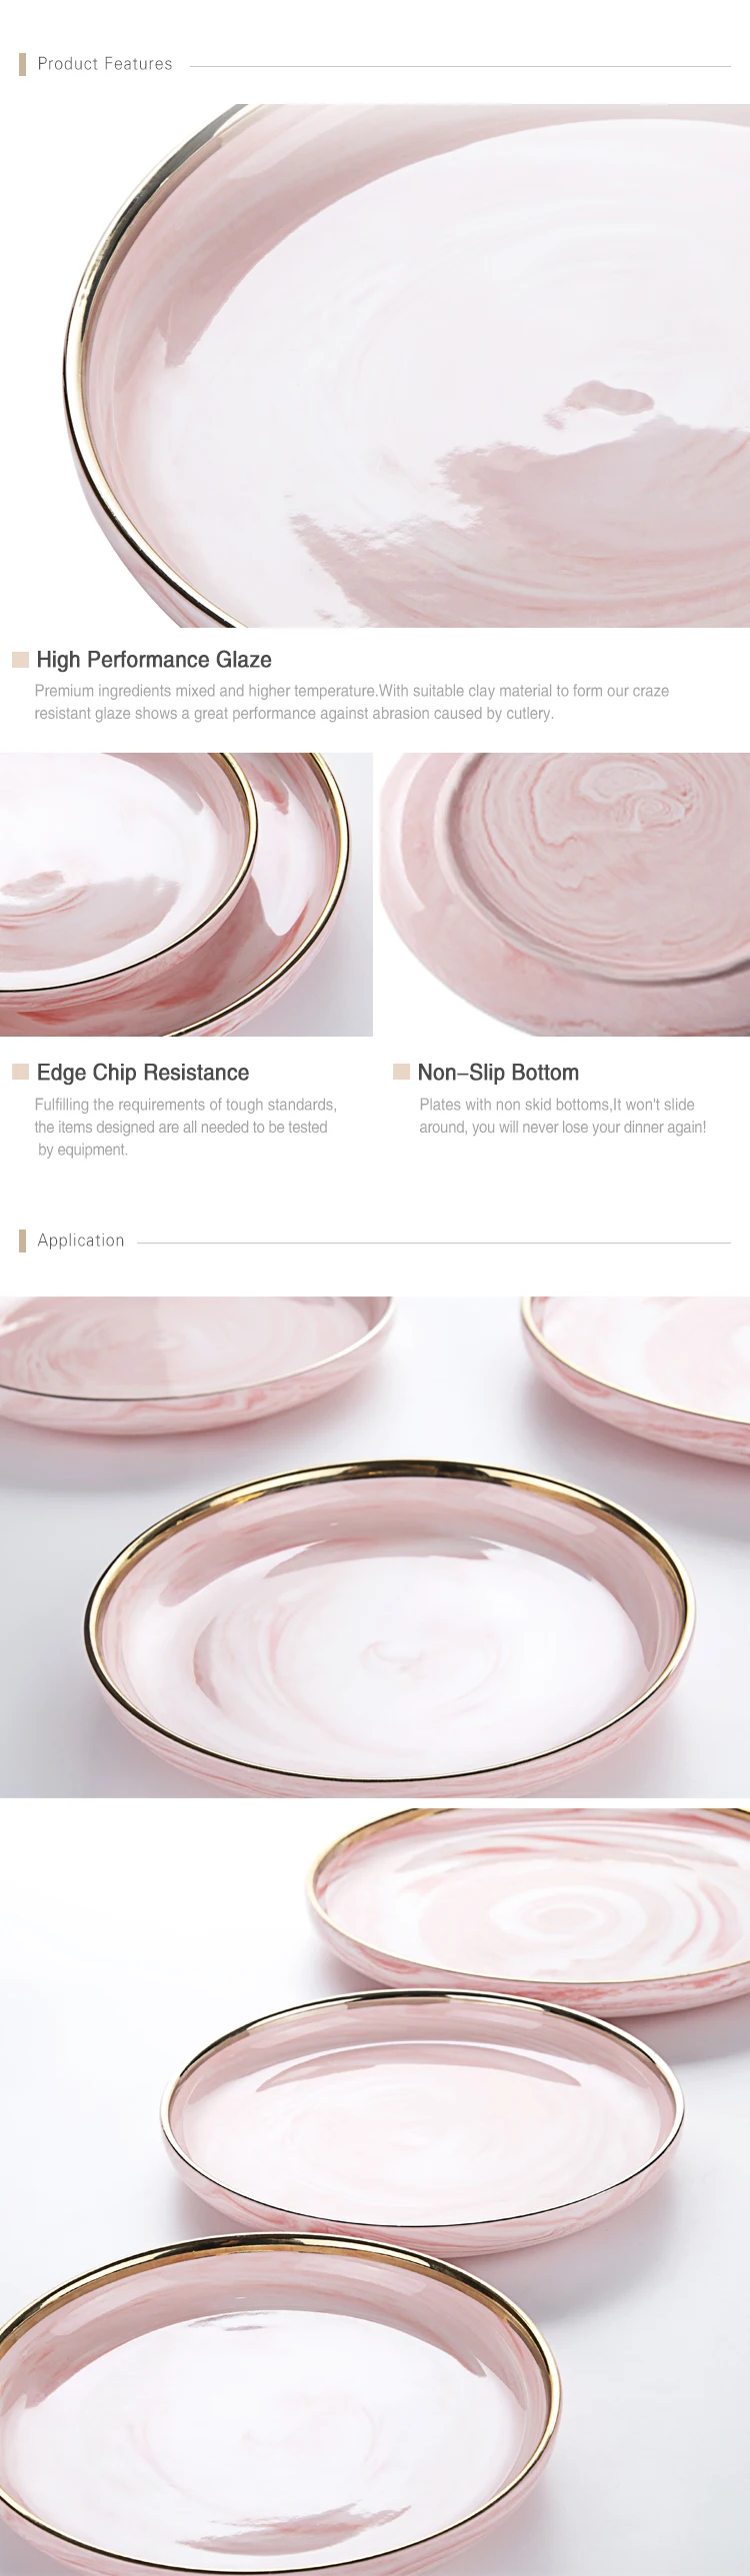 Hotel Coffee Restaurant Catering Porcelain Catering Plates  Golden Plate Wedding Pink Marble Dinner Plate%